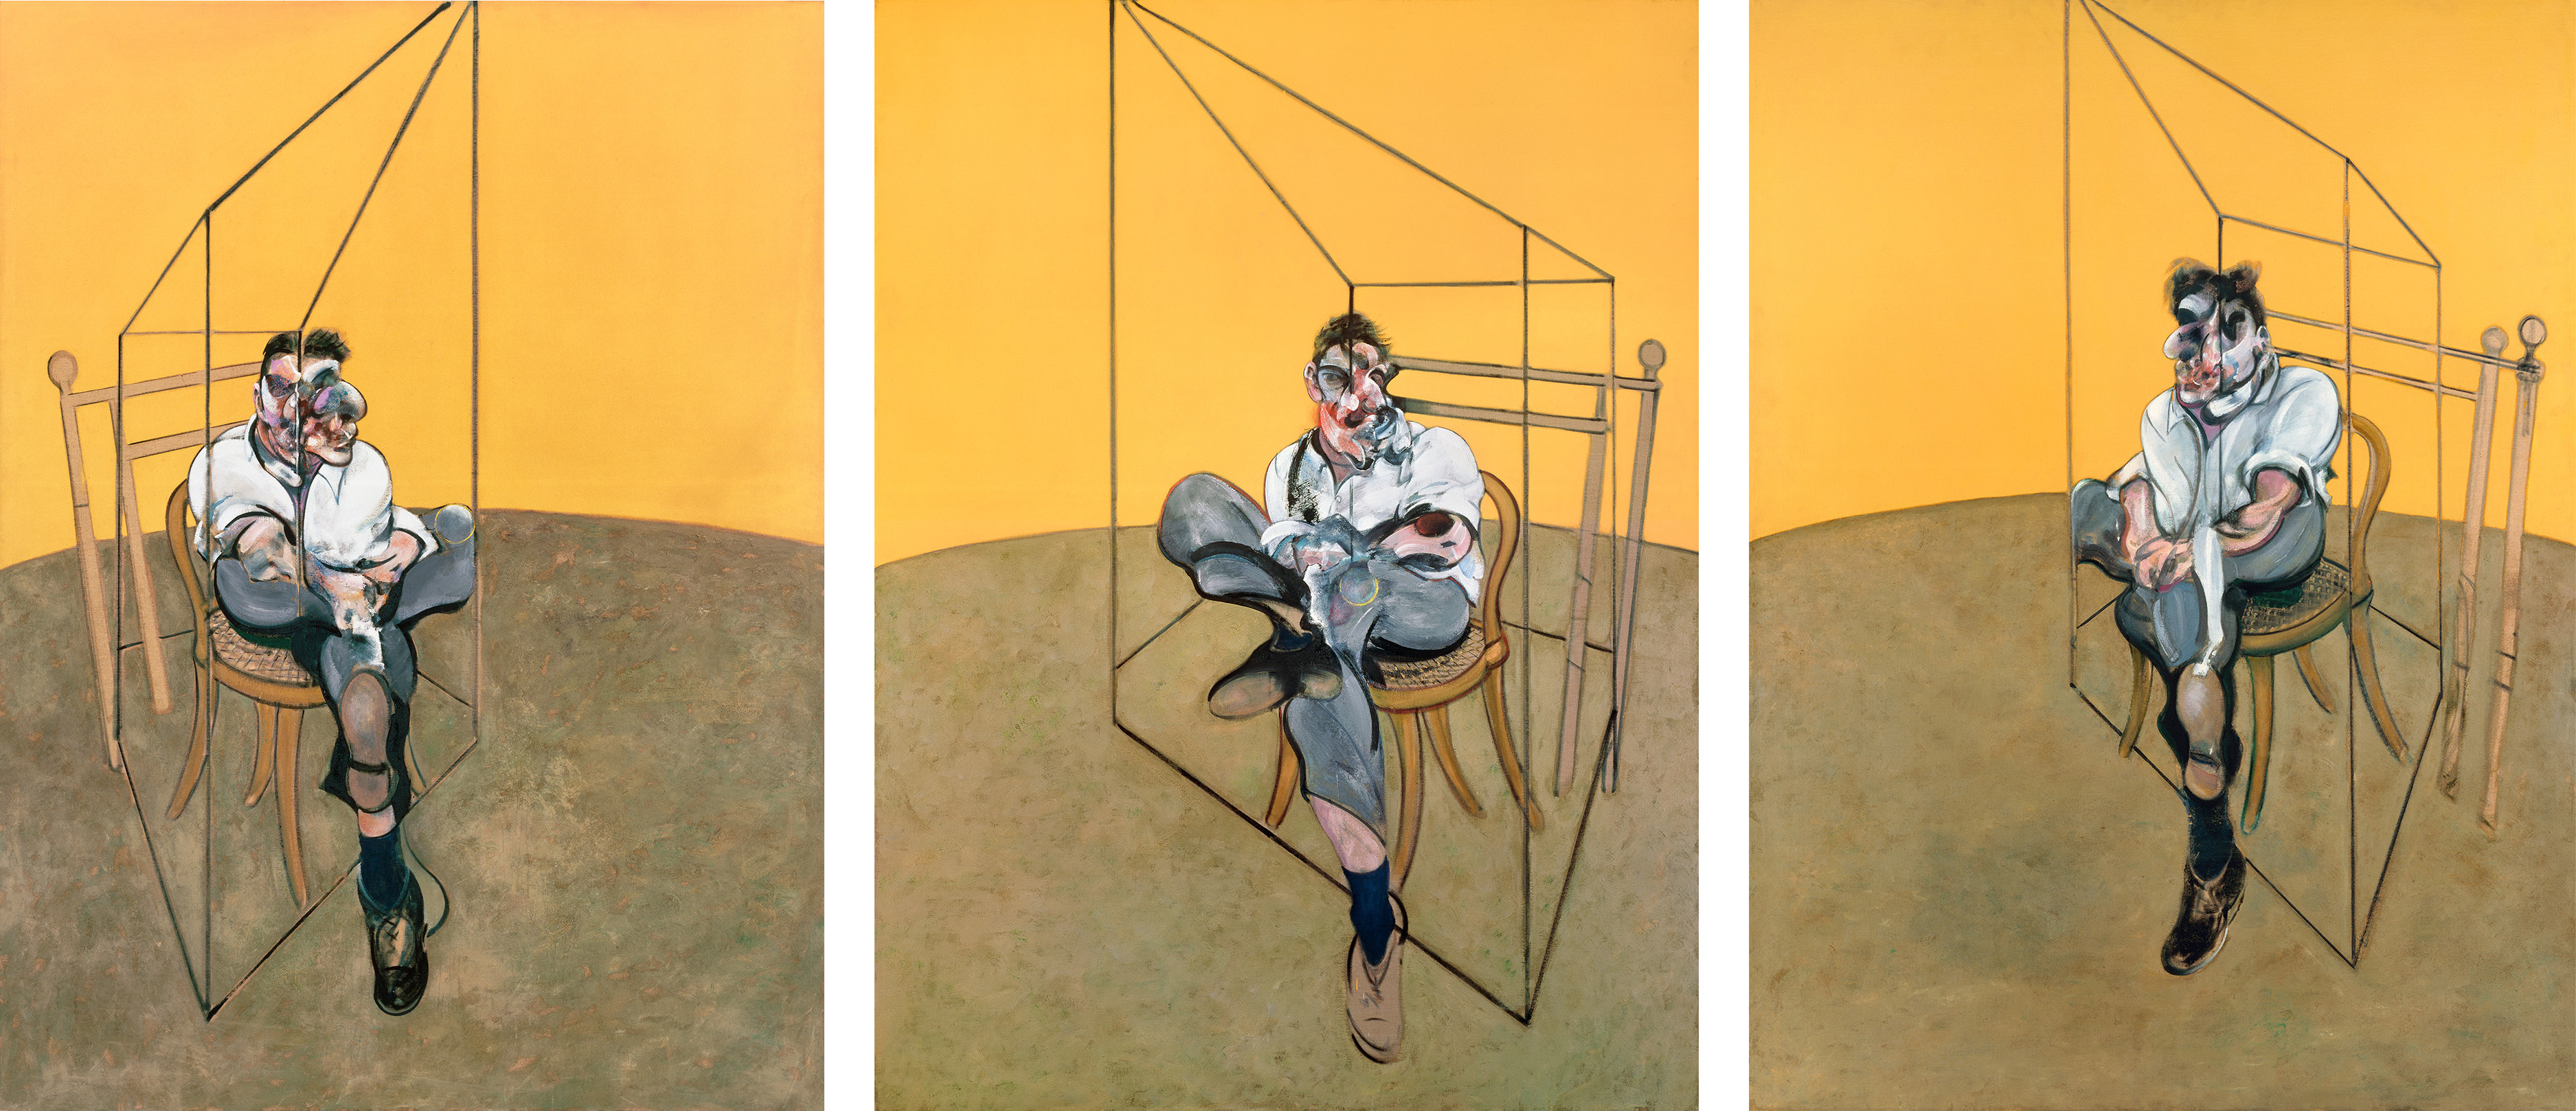 Francis Bacon, Three Studies of Lucian Freud, 1969. Oil on canvas. CR number 69-07. © The Estate of Francis Bacon / DACS London 2020. All rights reserved.